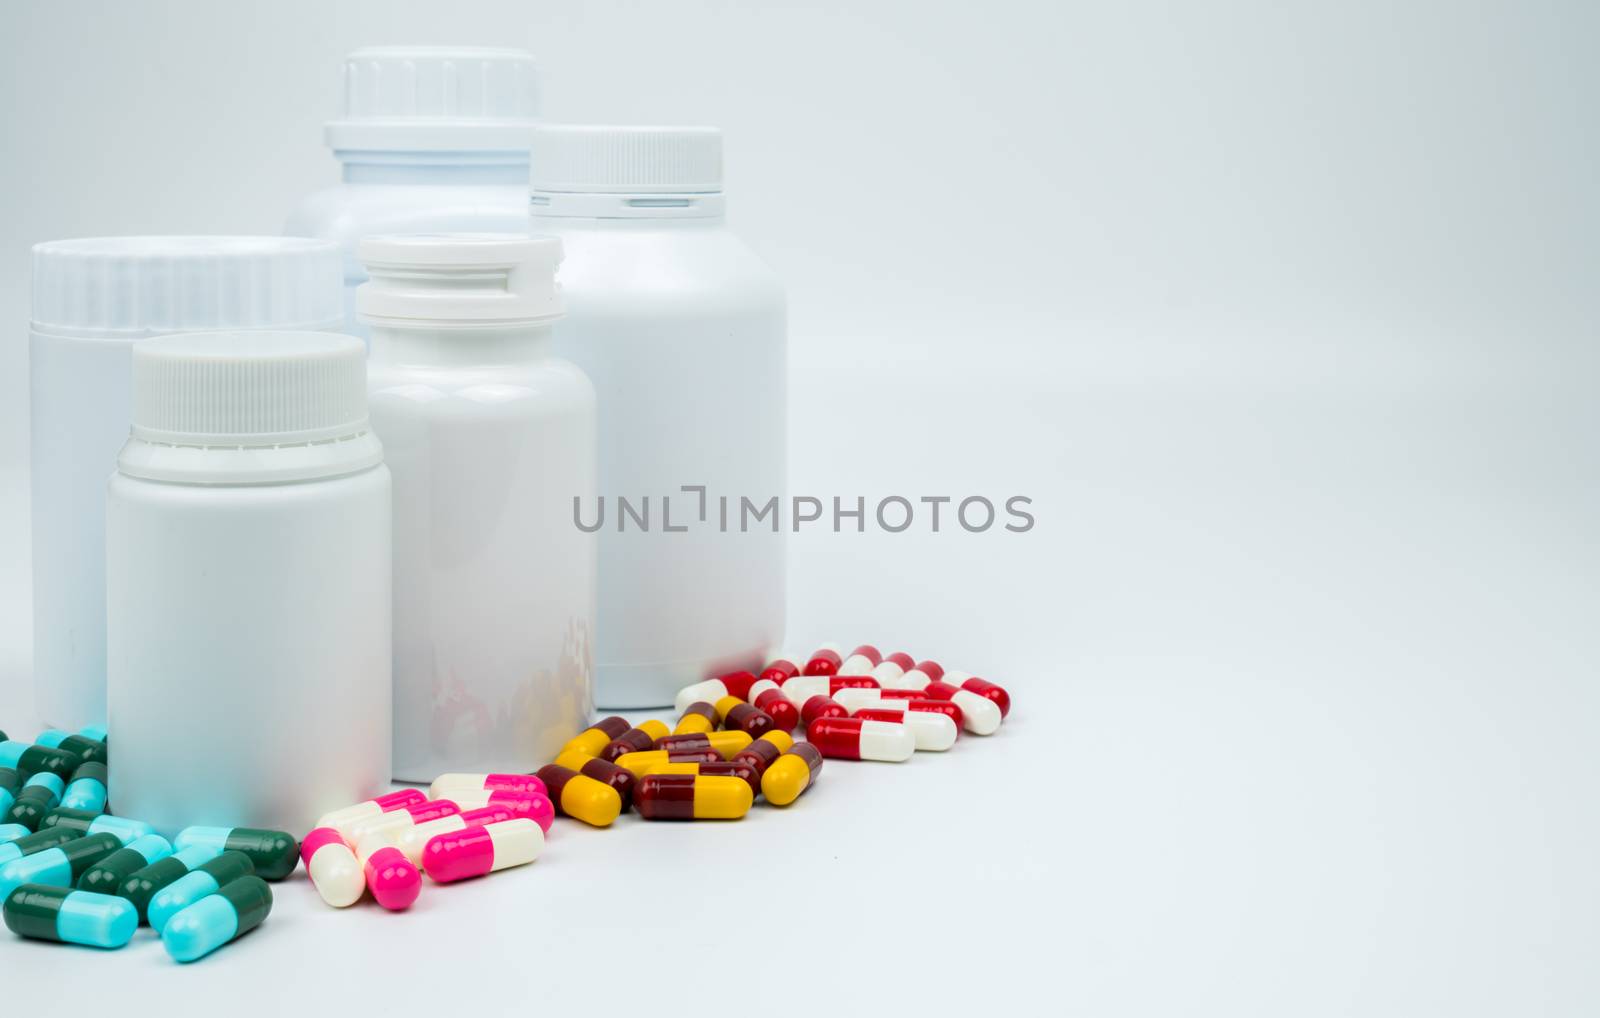 Antibiotic capsules pills and plastic bottle with blank label isolated on white background with copy space. Drug resistance concept. Antibiotics drug use with reasonable and global healthcare concept. Pharmaceutical industry. Pharmacy background. Health budgets and policy concept.